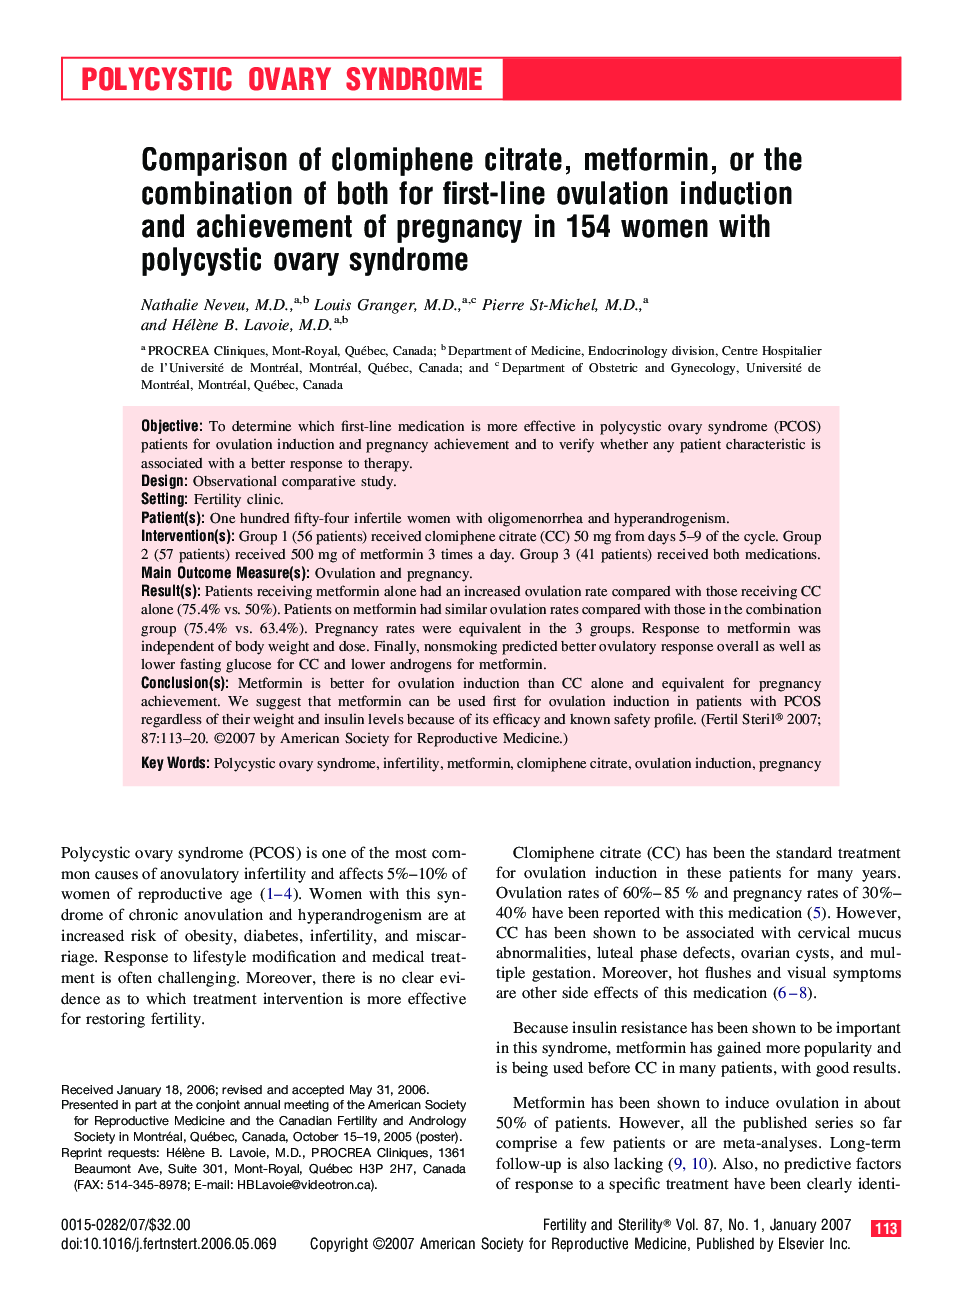 Comparison of clomiphene citrate, metformin, or the combination of both for first-line ovulation induction and achievement of pregnancy in 154 women with polycystic ovary syndrome